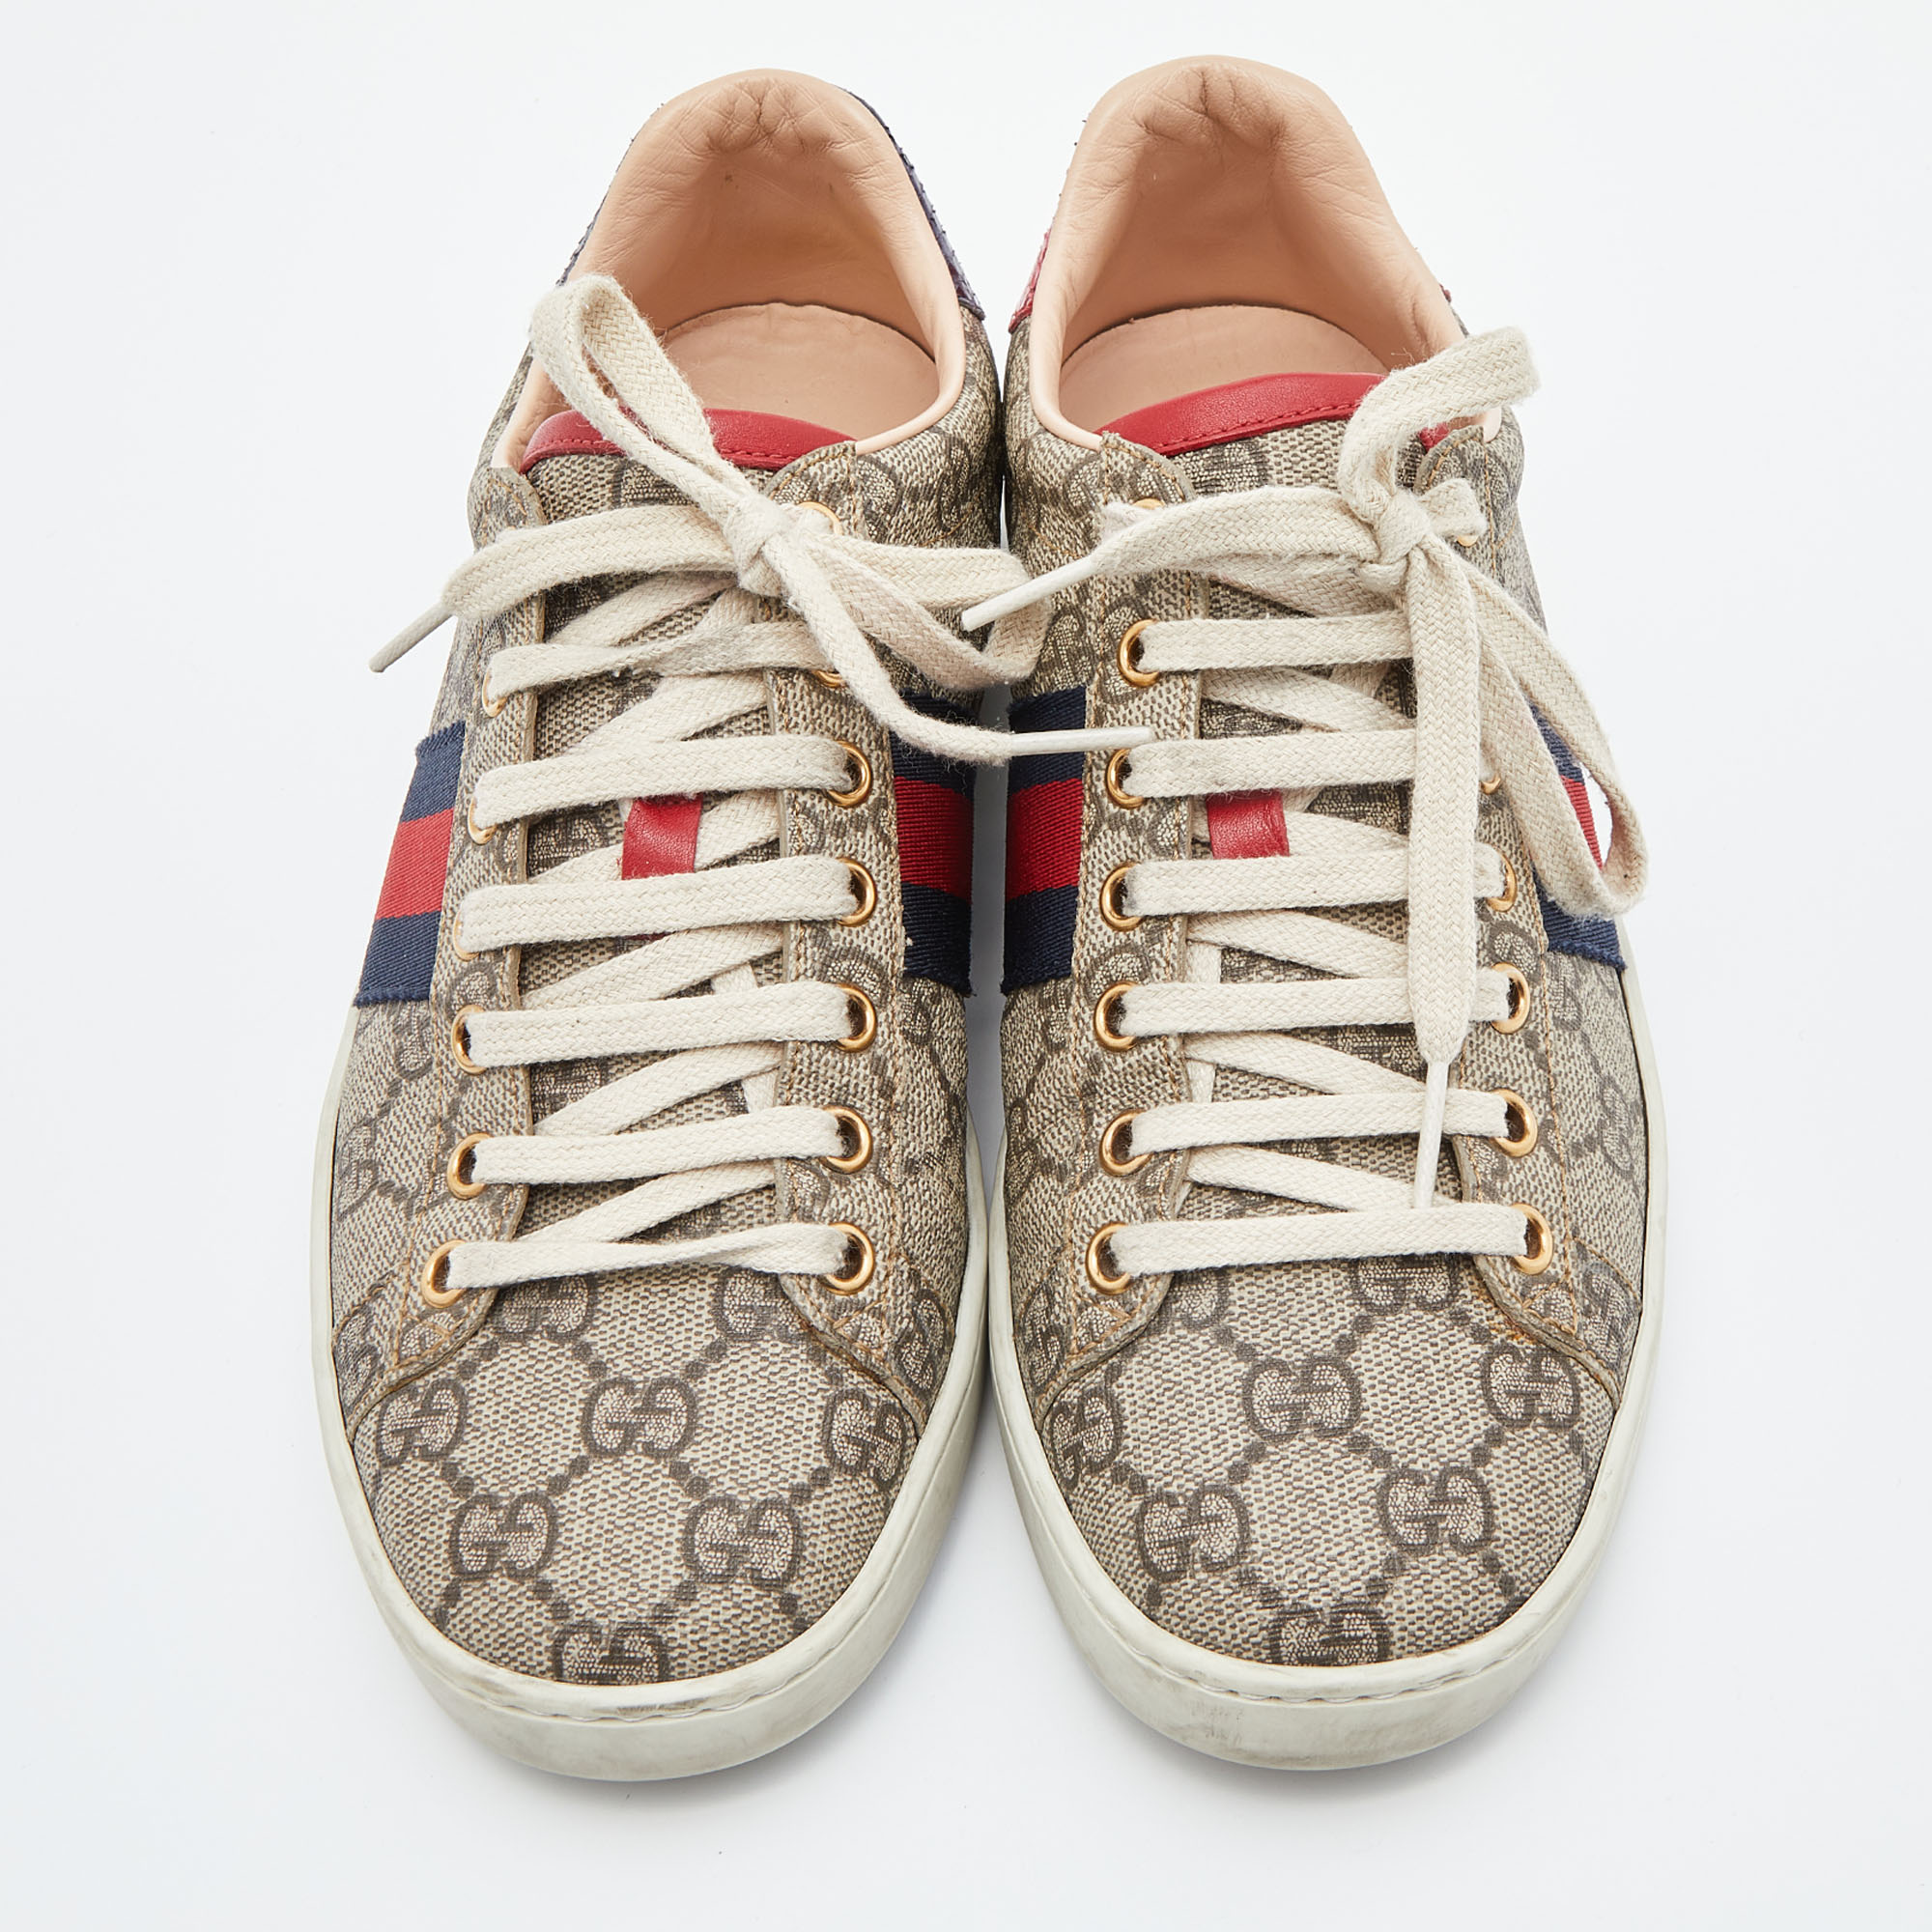 Gucci Beige/Brown GG Supreme Canvas Ace Sneakers Size 37